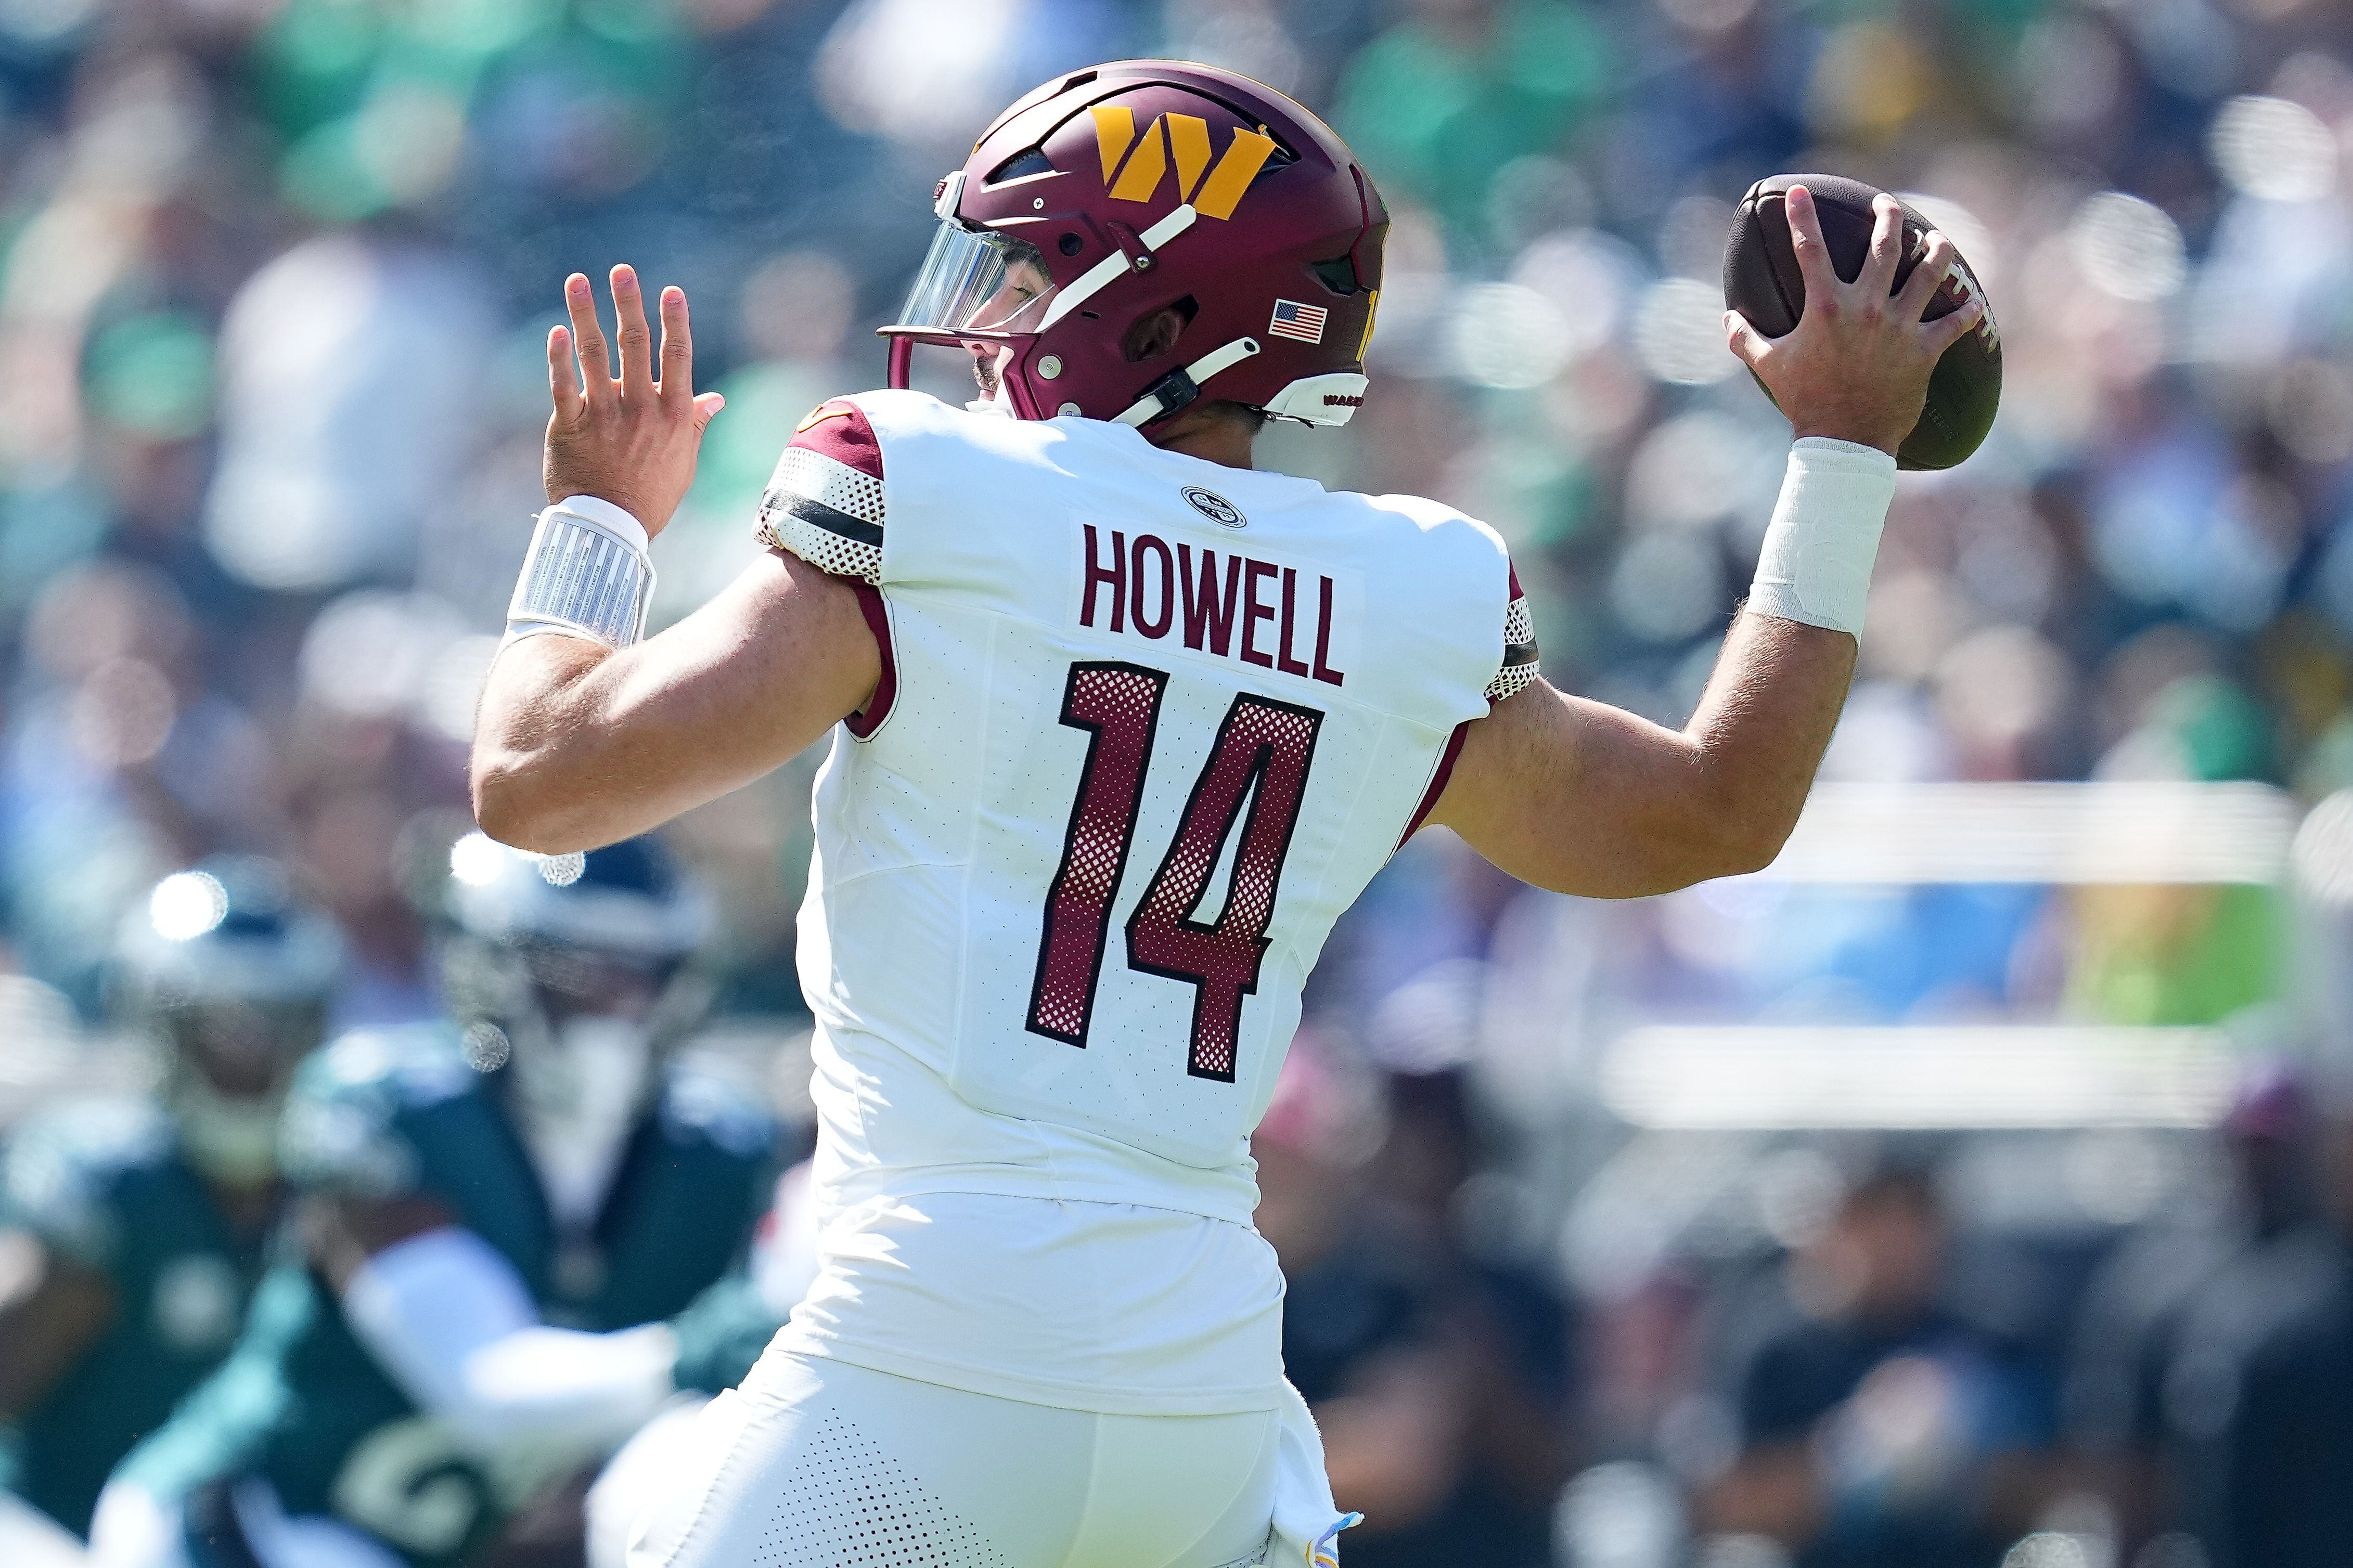 Washington Commanders: Twitter reacts to Sam Howell's game vs. Eagles